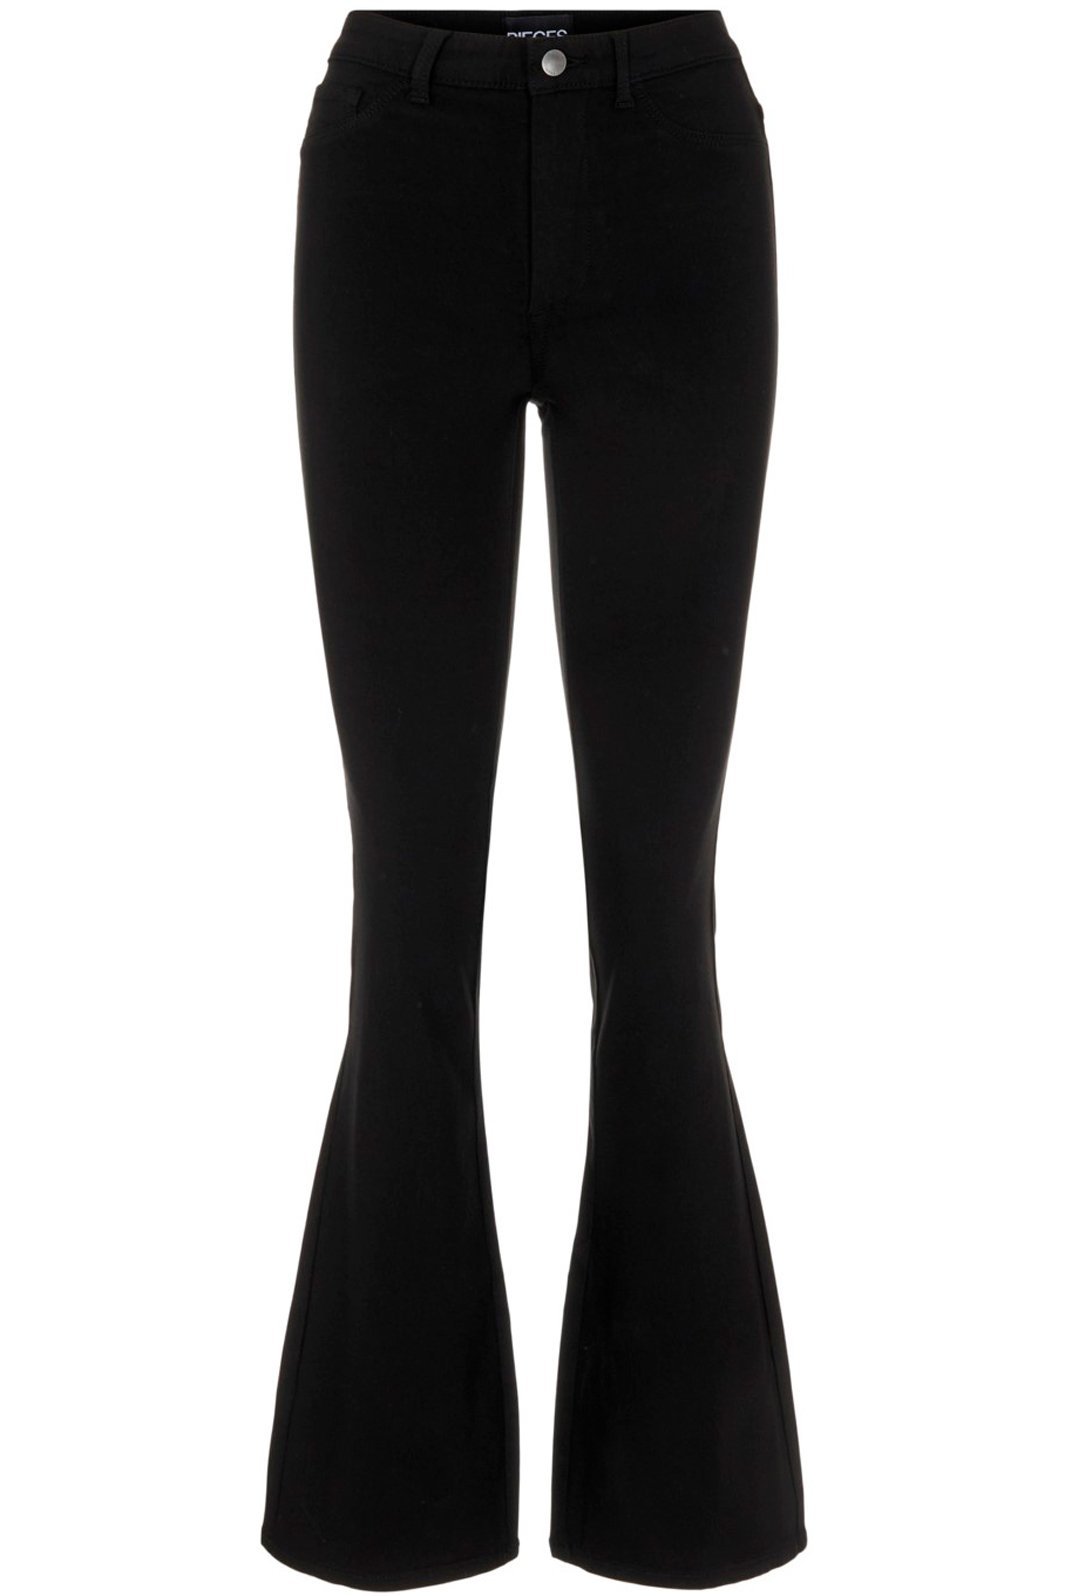 Pieces - PcHighskin Flared Pant - Black Jeans 